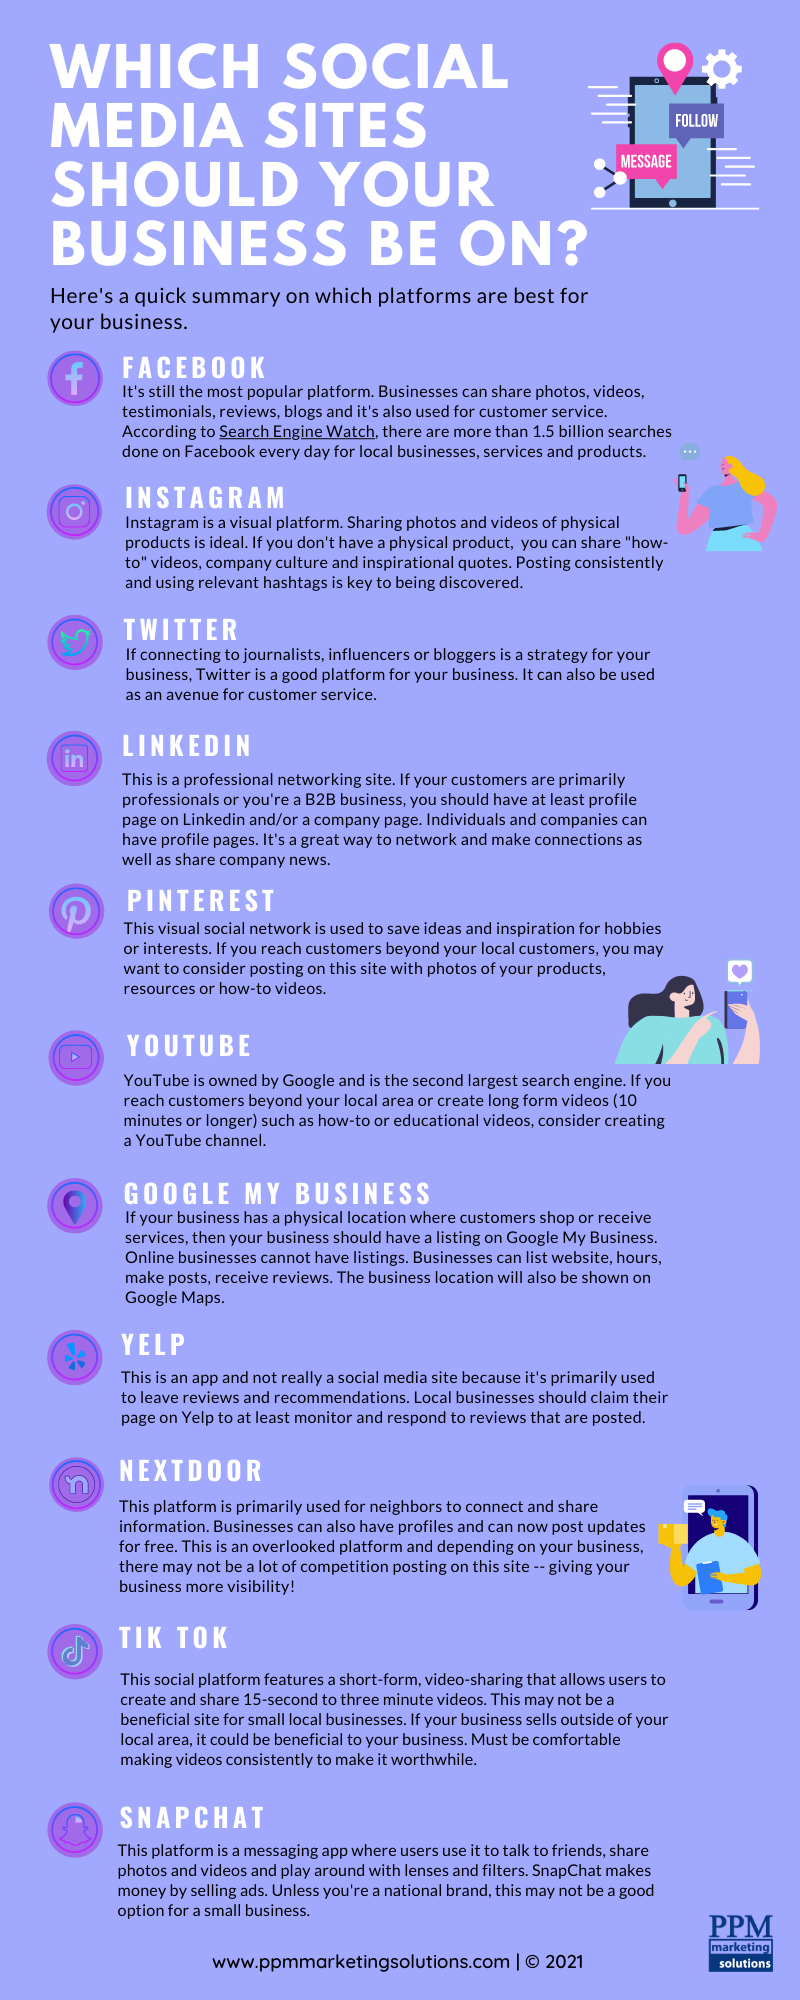 Infographic of which social media platforms are best for small businesses